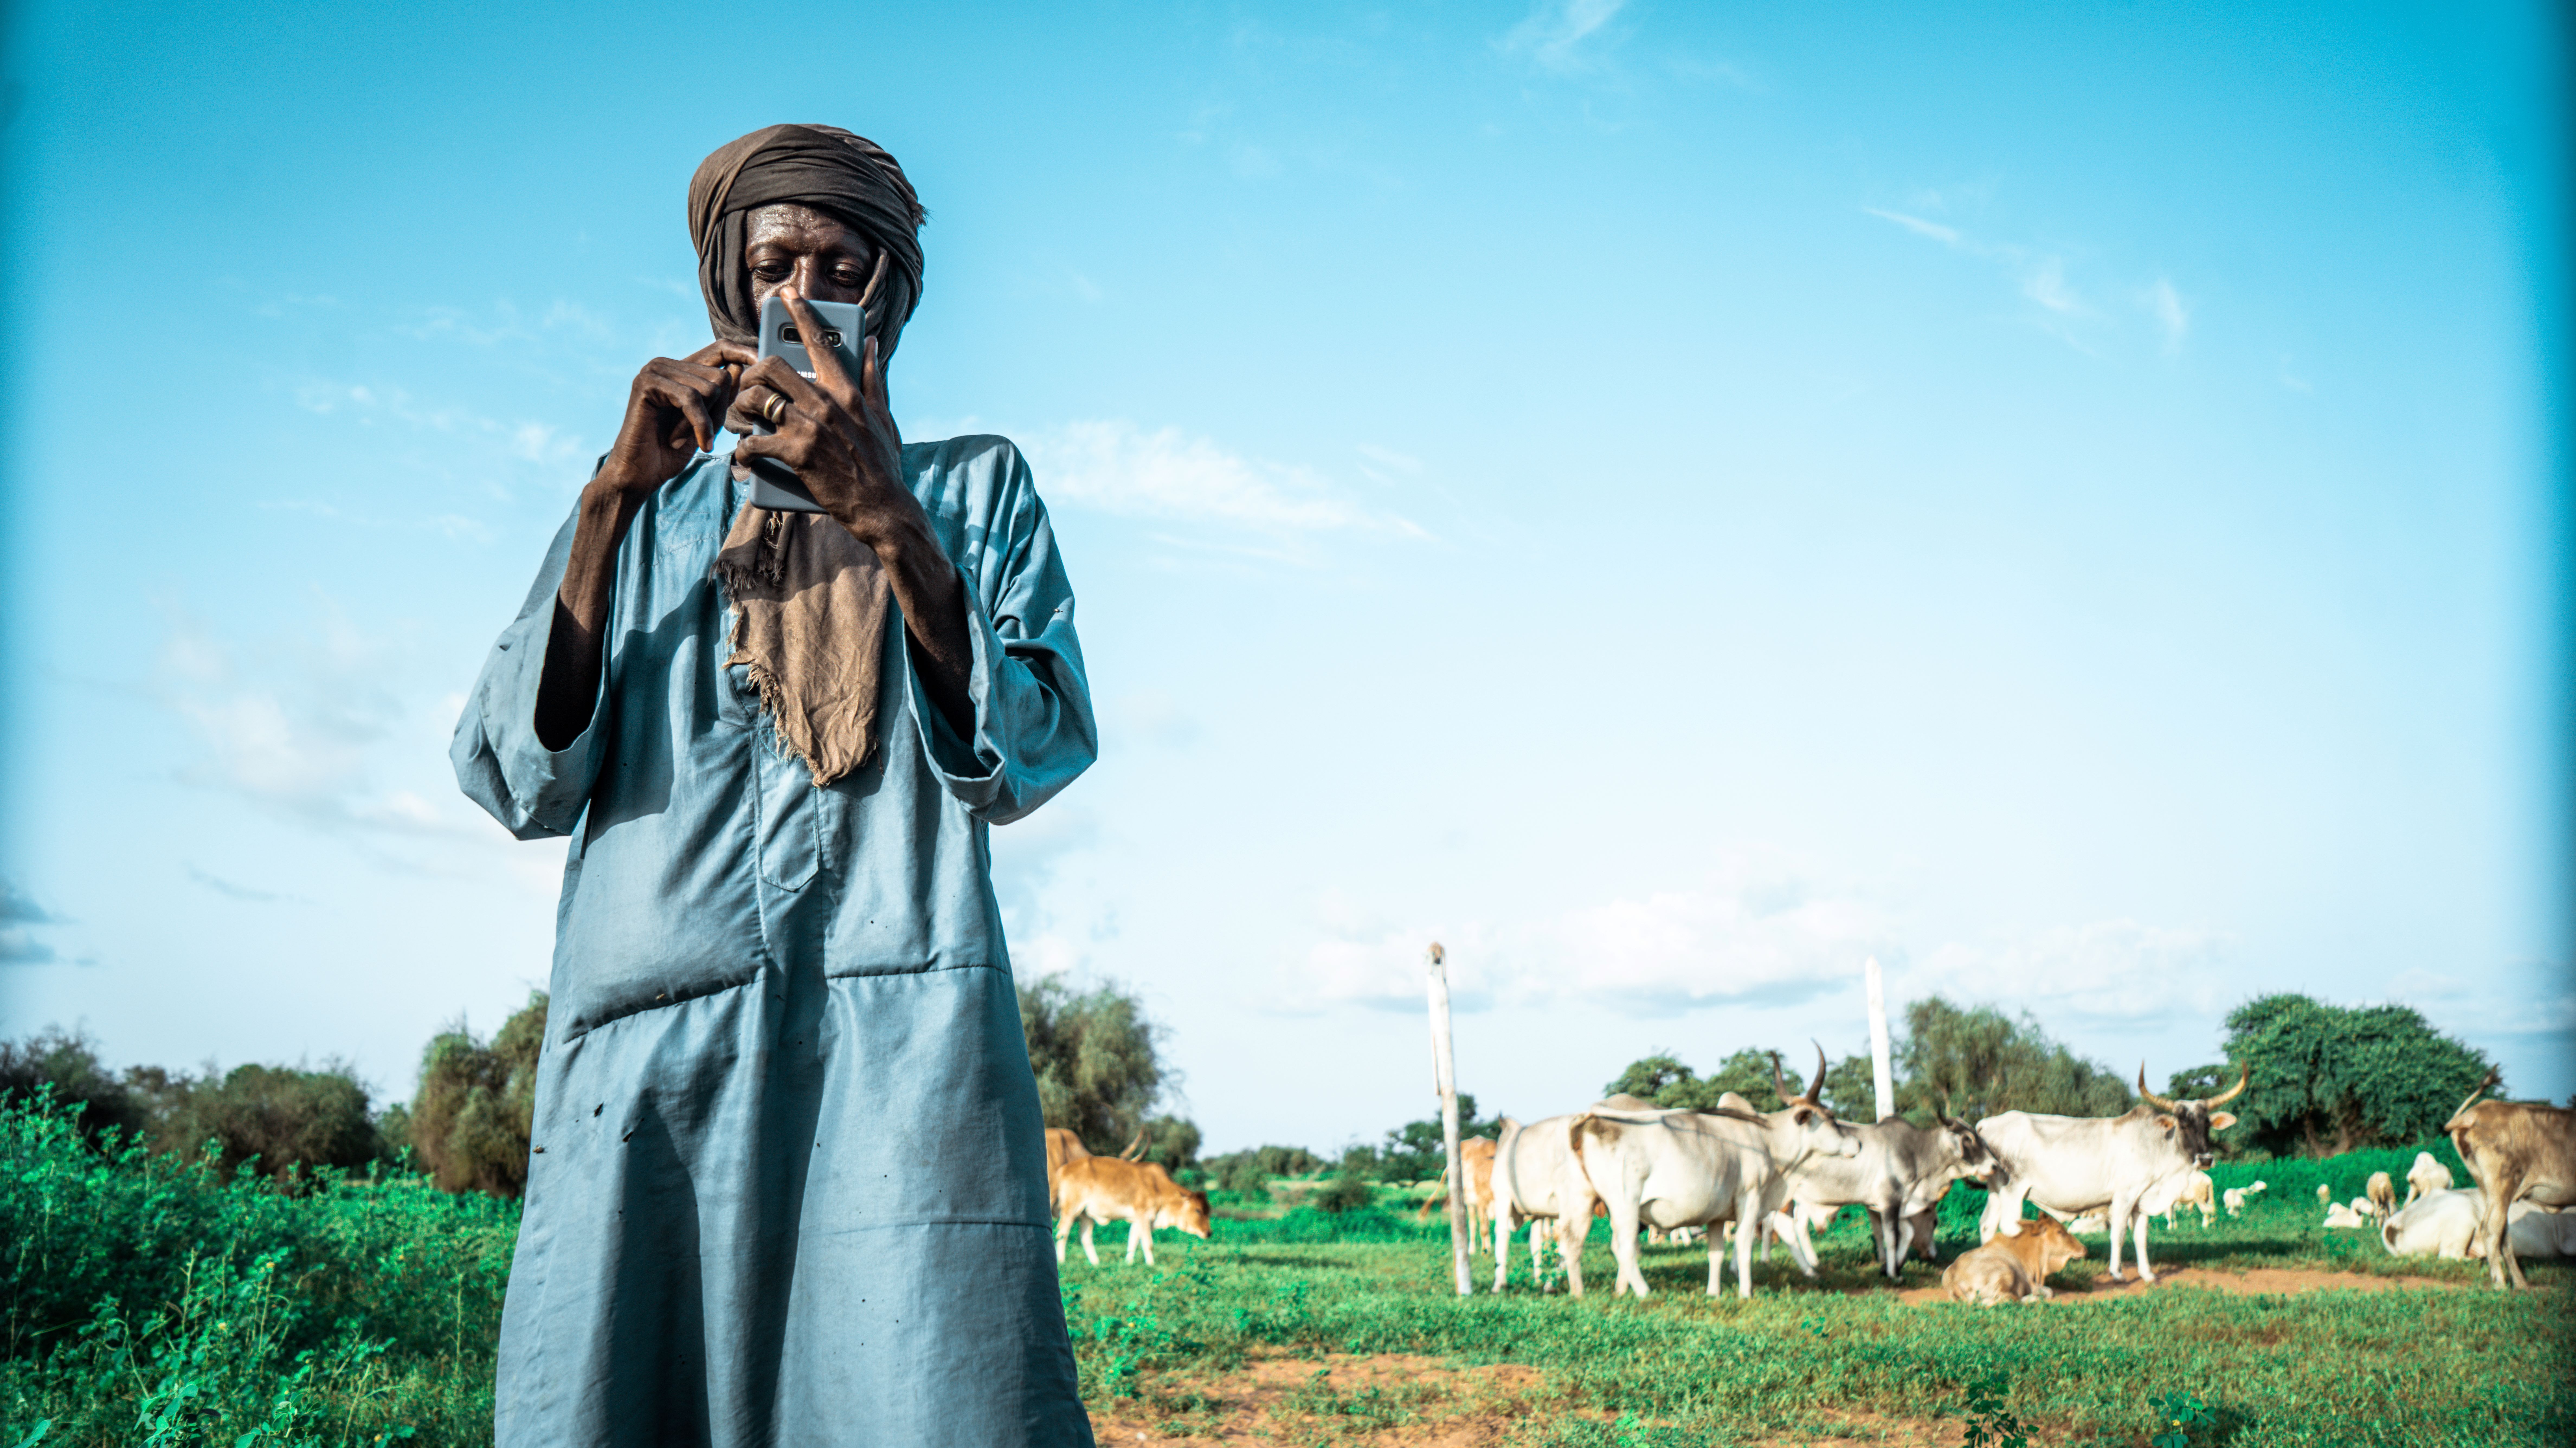 a person stands on their phone in front of a field of cattle